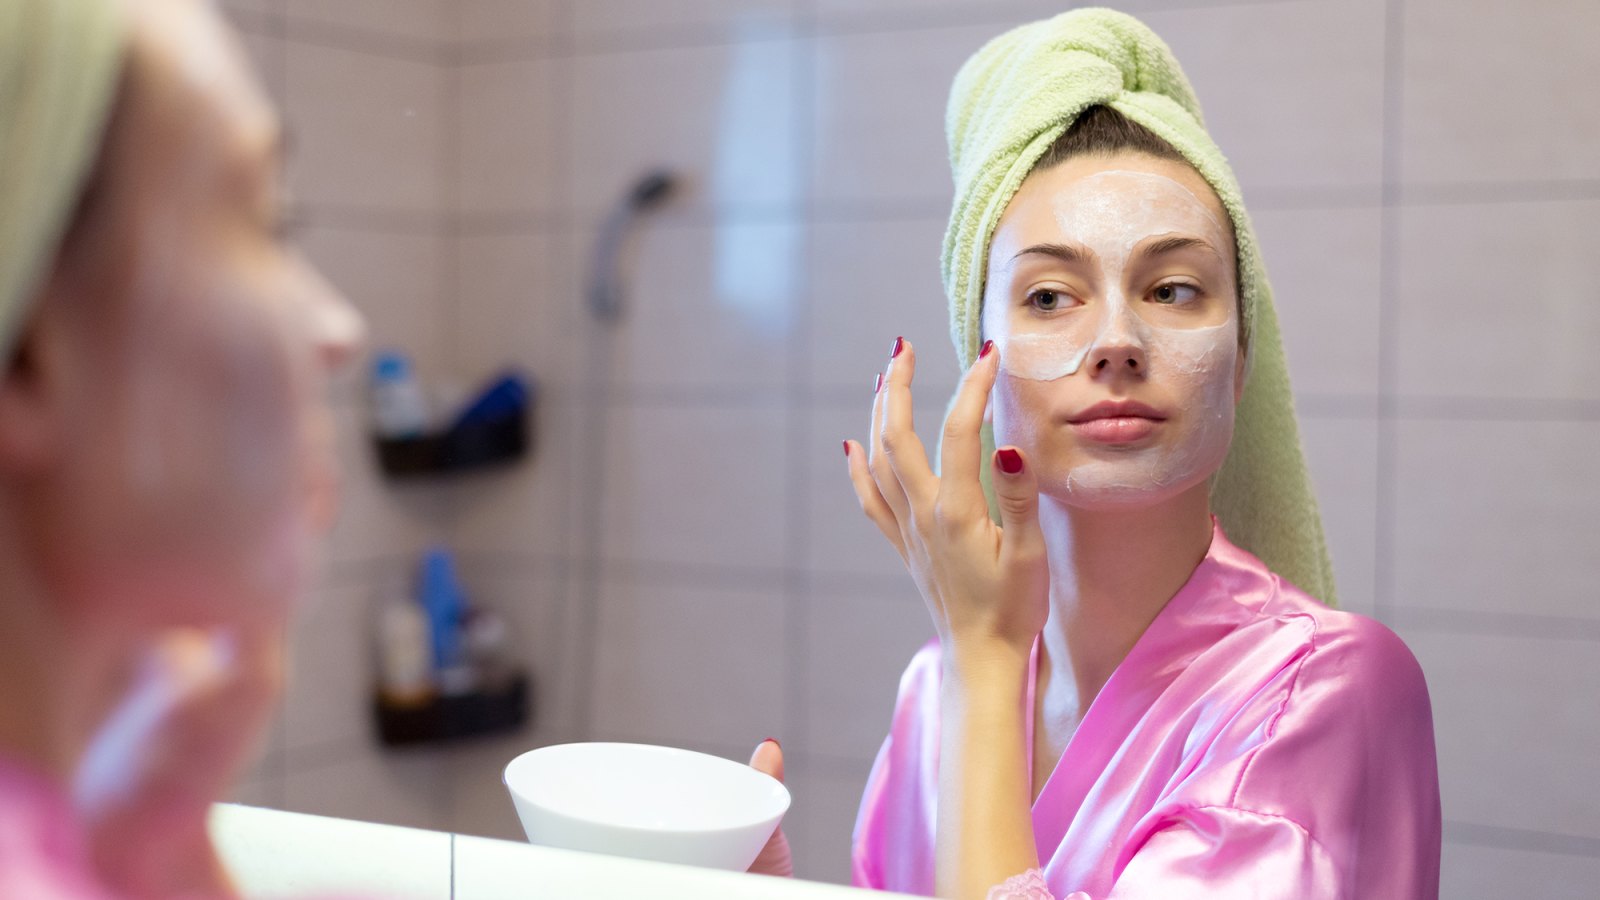 Beautiful young woman putting facial mask on her face in front of the mirror at home.